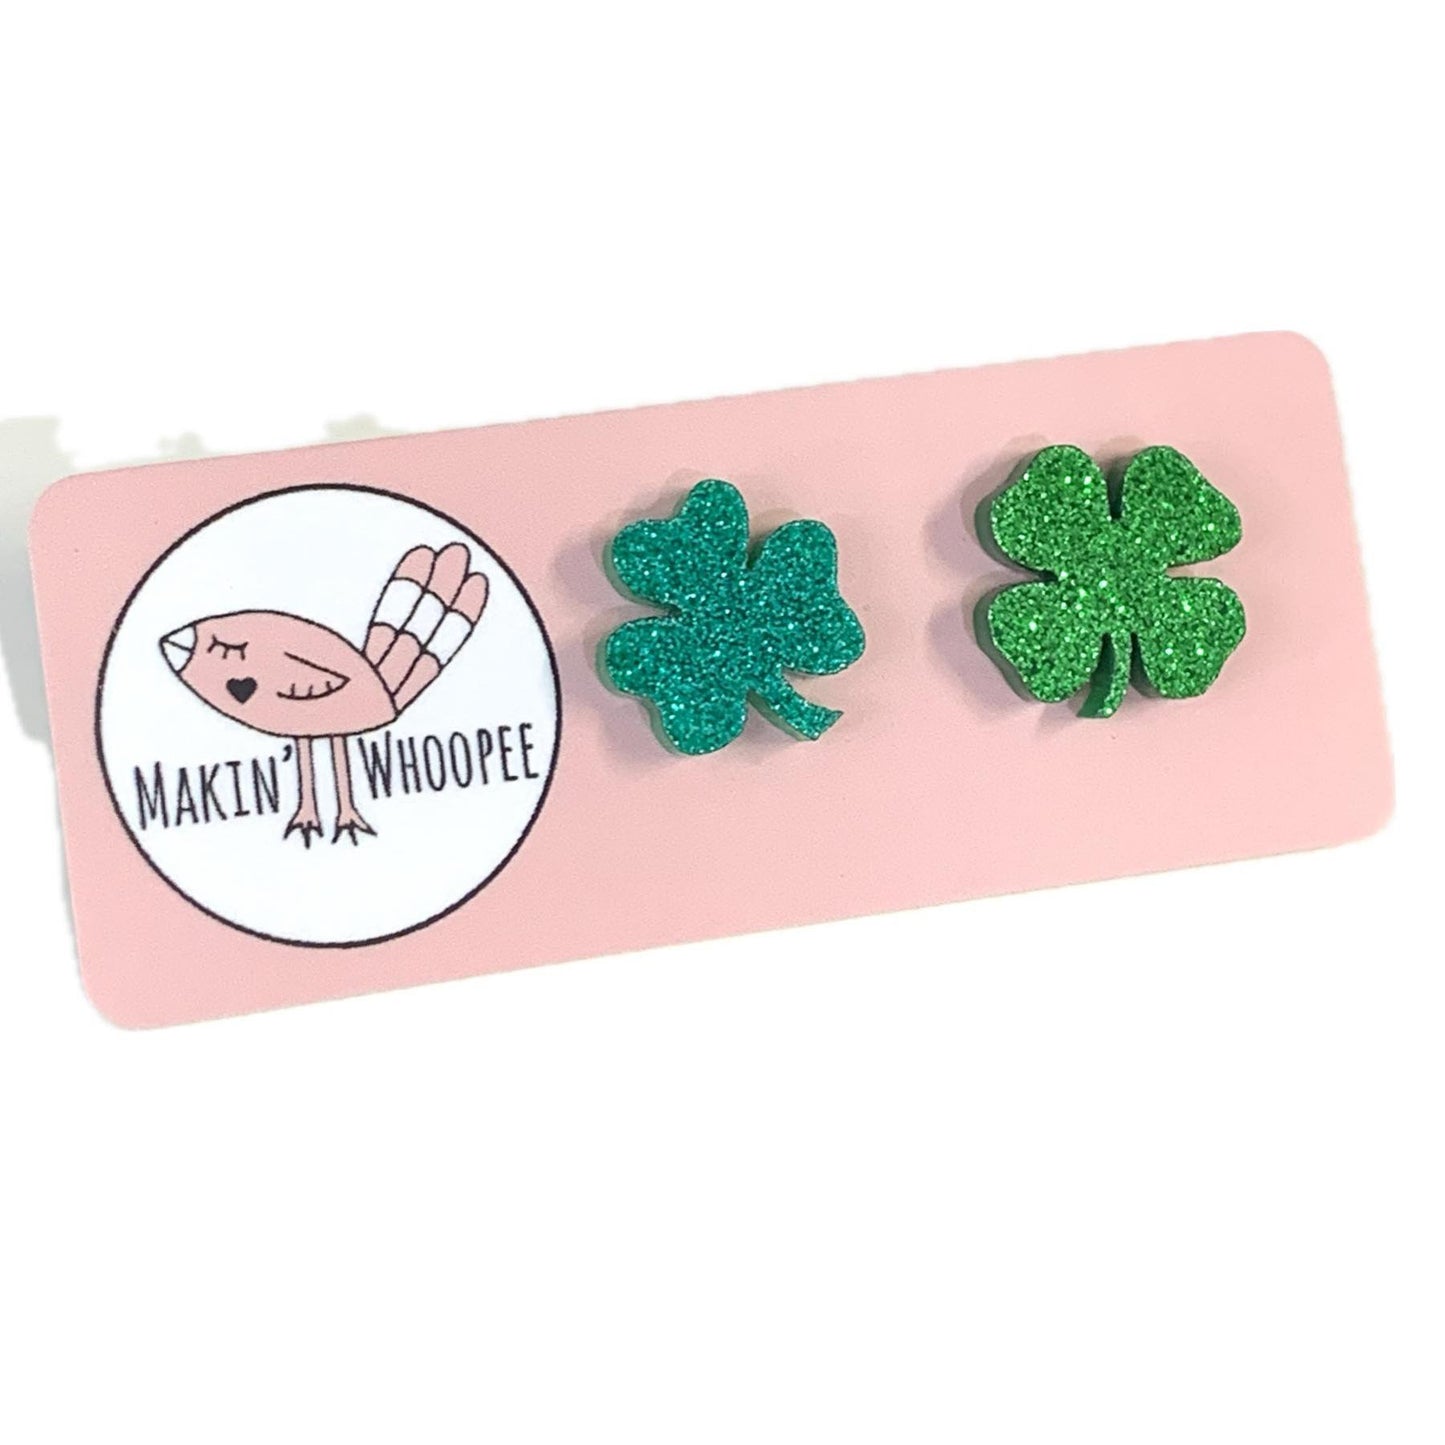 MAKIN' WHOOPEE - Mismatched Shamrock & Clover Studs